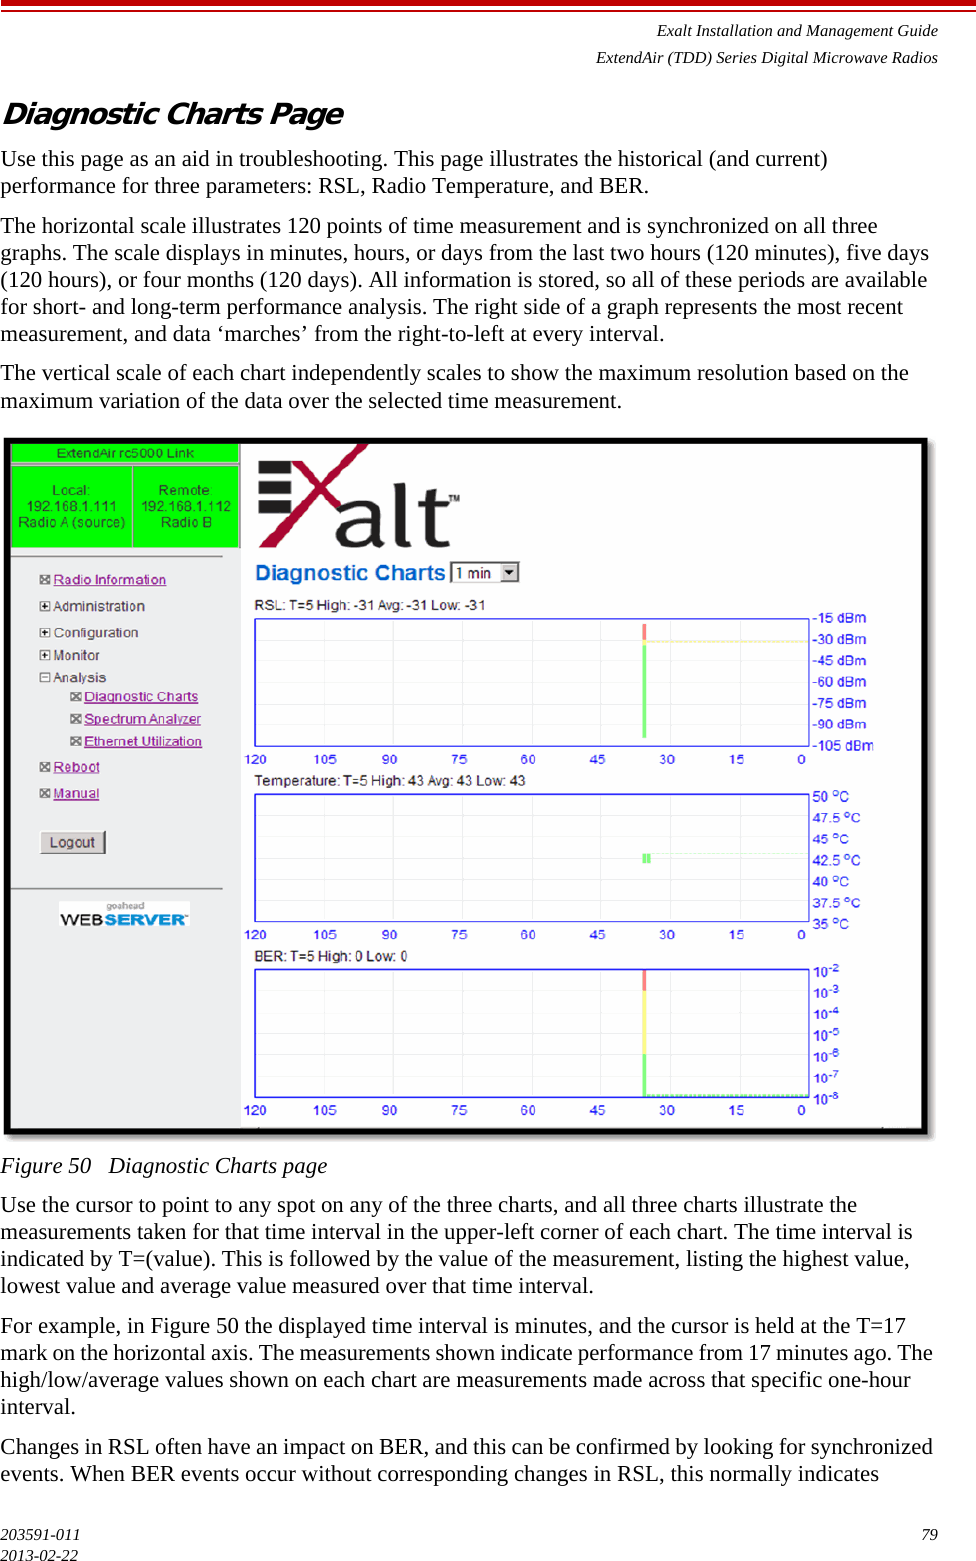 Exalt Installation and Management GuideExtendAir (TDD) Series Digital Microwave Radios203591-011 792013-02-22Diagnostic Charts PageUse this page as an aid in troubleshooting. This page illustrates the historical (and current) performance for three parameters: RSL, Radio Temperature, and BER.The horizontal scale illustrates 120 points of time measurement and is synchronized on all three graphs. The scale displays in minutes, hours, or days from the last two hours (120 minutes), five days (120 hours), or four months (120 days). All information is stored, so all of these periods are available for short- and long-term performance analysis. The right side of a graph represents the most recent measurement, and data ‘marches’ from the right-to-left at every interval.The vertical scale of each chart independently scales to show the maximum resolution based on the maximum variation of the data over the selected time measurement. Figure 50   Diagnostic Charts pageUse the cursor to point to any spot on any of the three charts, and all three charts illustrate the measurements taken for that time interval in the upper-left corner of each chart. The time interval is indicated by T=(value). This is followed by the value of the measurement, listing the highest value, lowest value and average value measured over that time interval.For example, in Figure 50 the displayed time interval is minutes, and the cursor is held at the T=17 mark on the horizontal axis. The measurements shown indicate performance from 17 minutes ago. The high/low/average values shown on each chart are measurements made across that specific one-hour interval.Changes in RSL often have an impact on BER, and this can be confirmed by looking for synchronized events. When BER events occur without corresponding changes in RSL, this normally indicates 